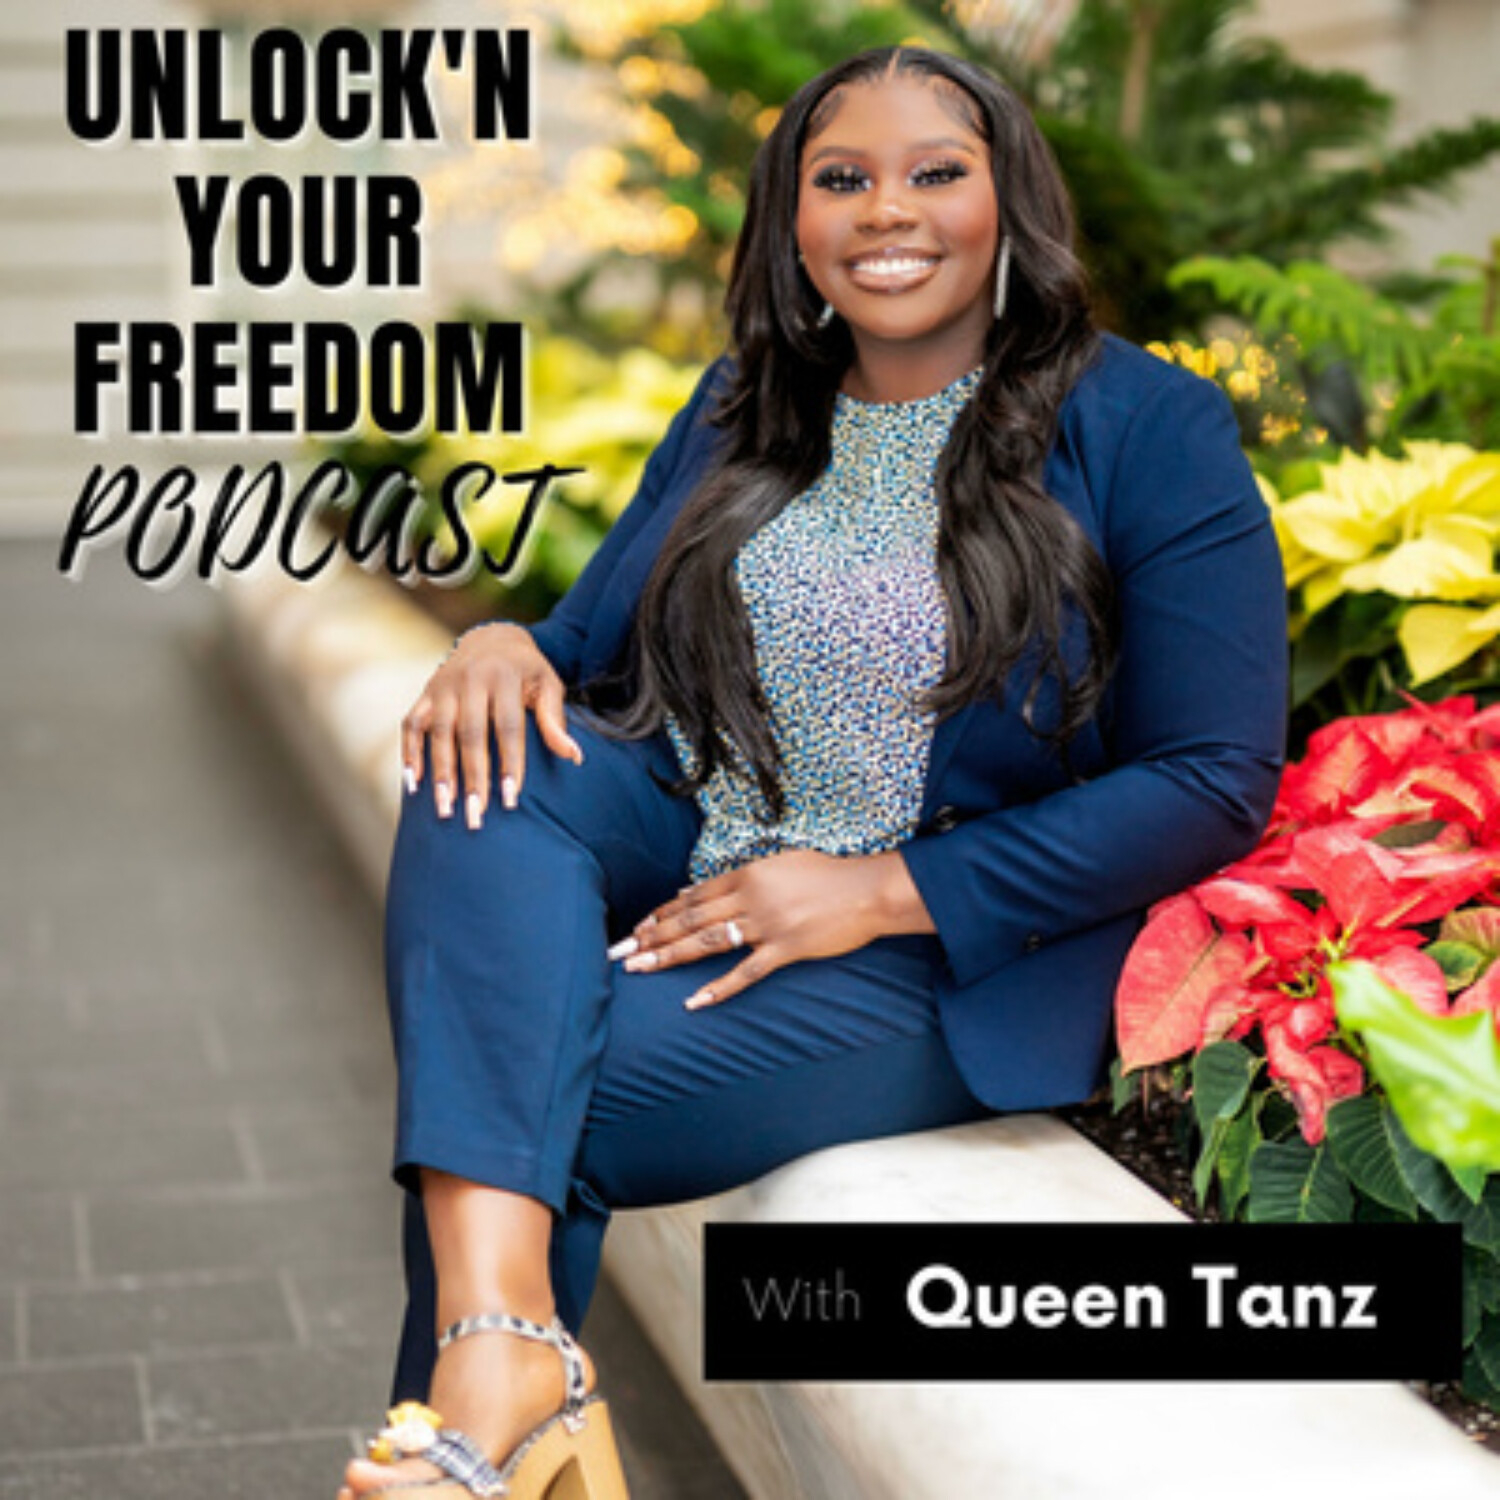 Chatters That Matter Presents: Unlock'N Your Freedom with Queen Tanz